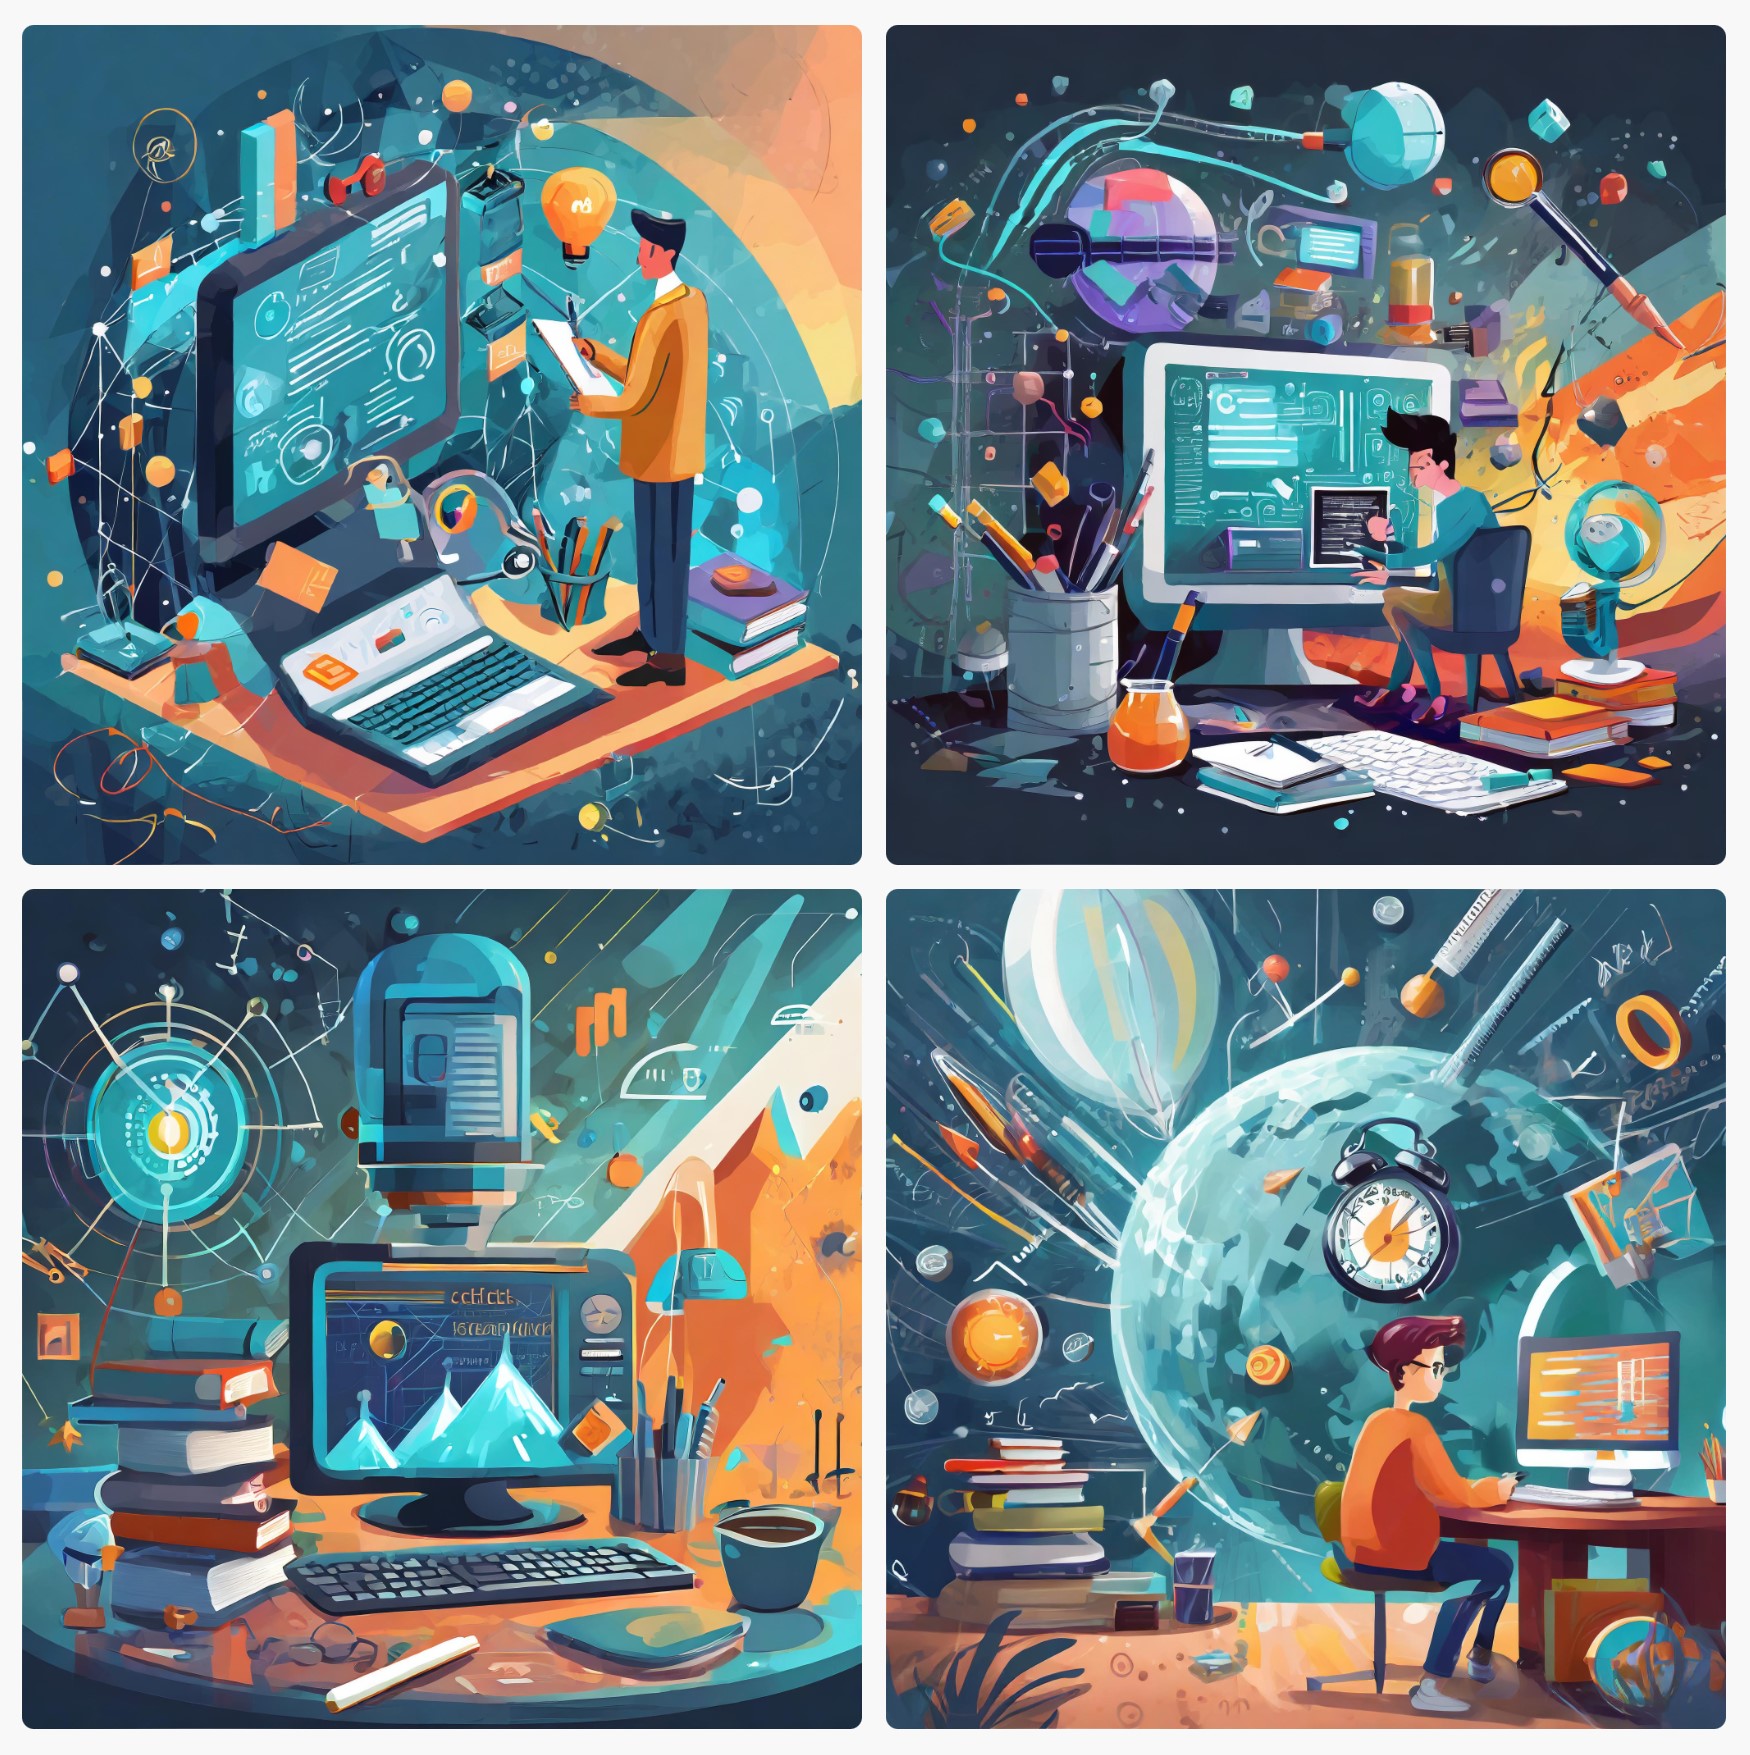 four colorful images displaying screens, keyboards, plantets, and a few male human figures interacting with them